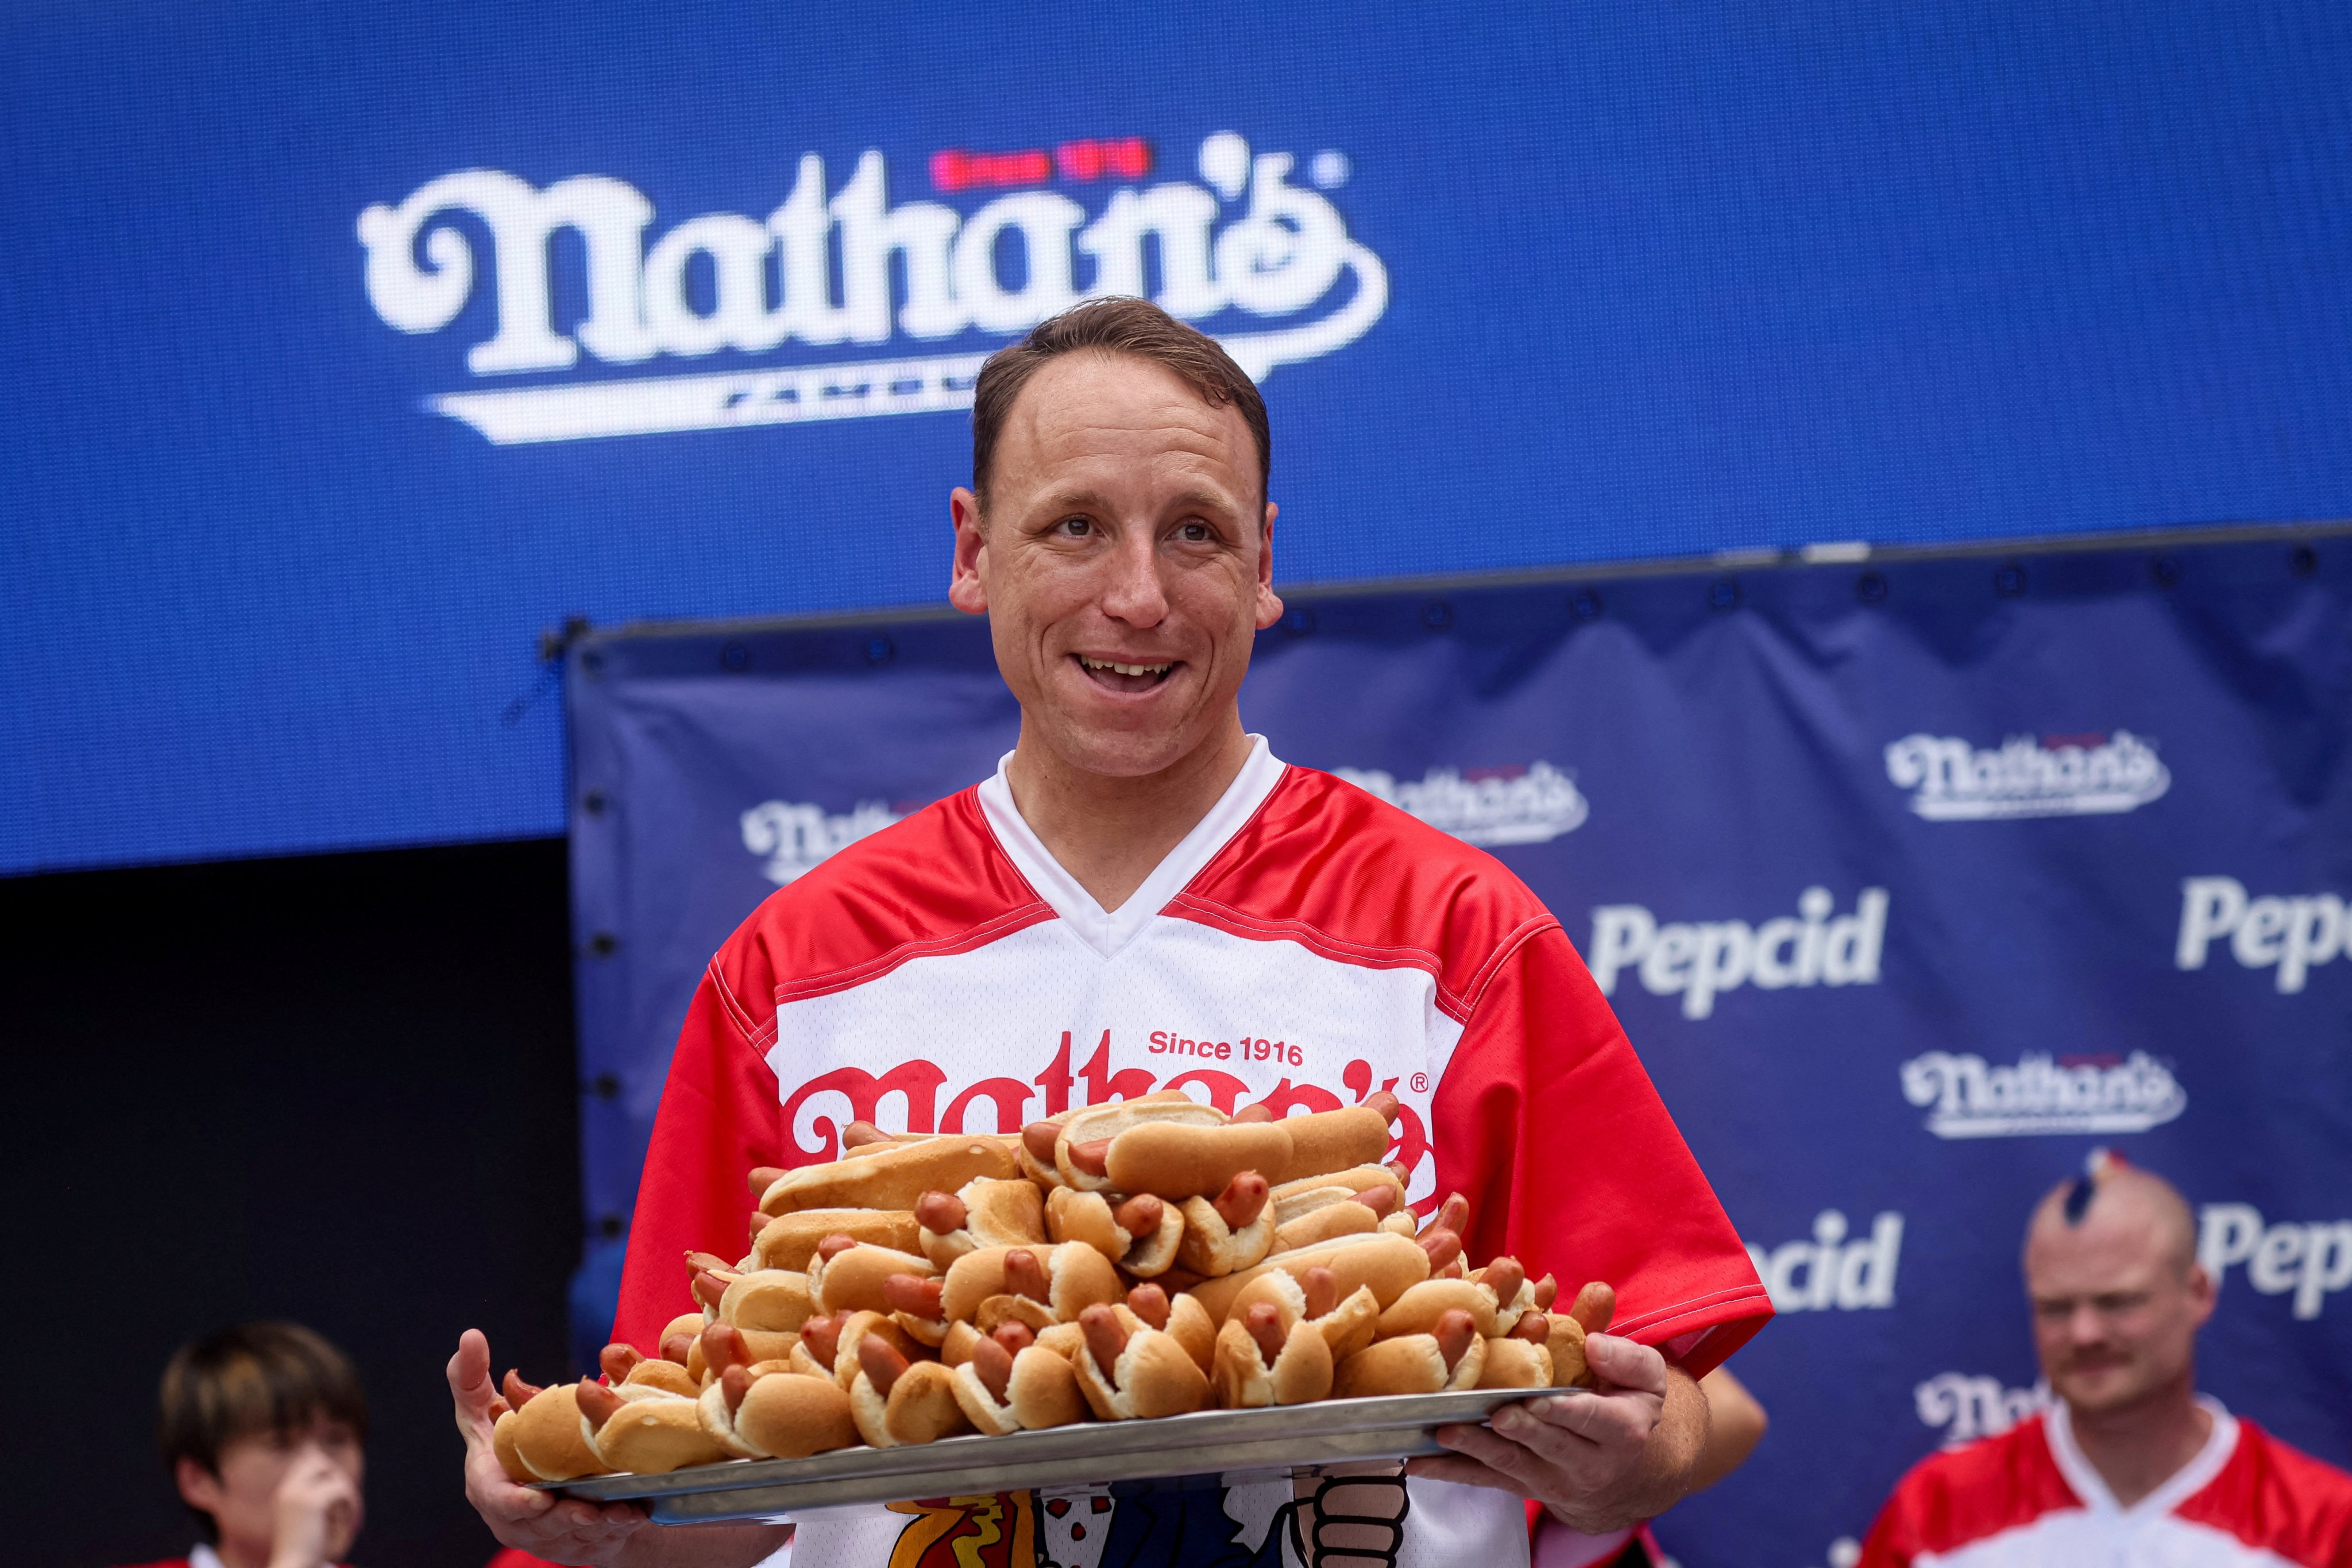 US competitive eating legend Joey Chestnut will face off against a fierce rival in a hot-dog eating contest on Netflix after he was excluded from Nathan’s Famous Fourth of July hot-dog eating contest. Photo: Reuters